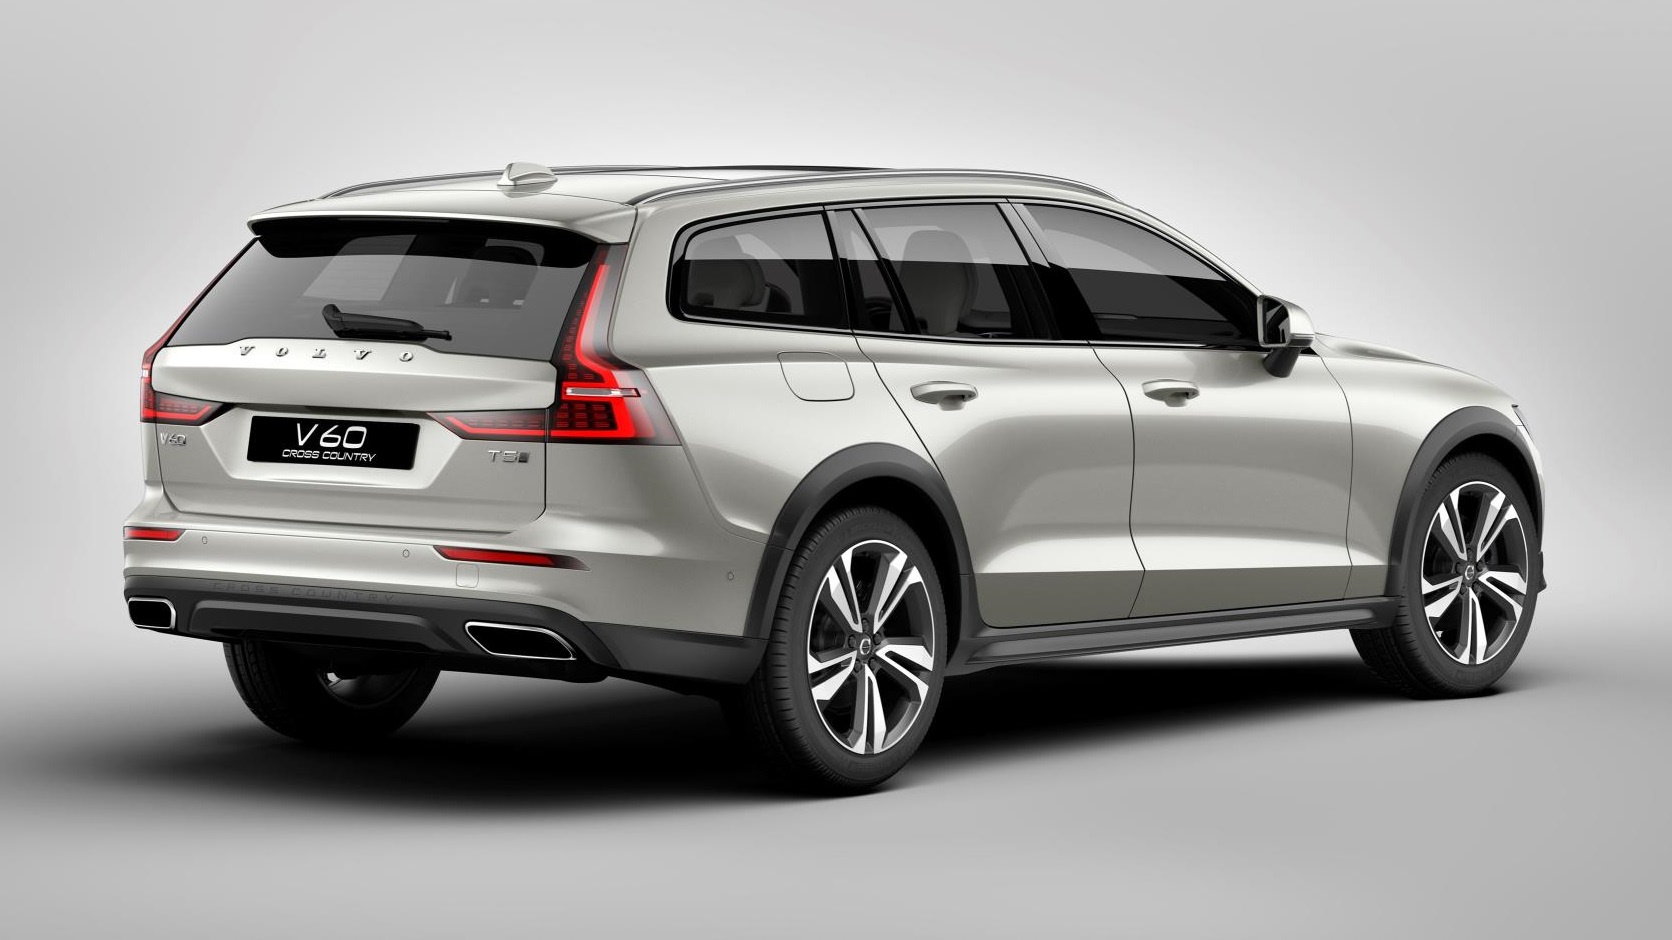 2019 Volvo V60 Cross Country Unveiled with Rugged Looks